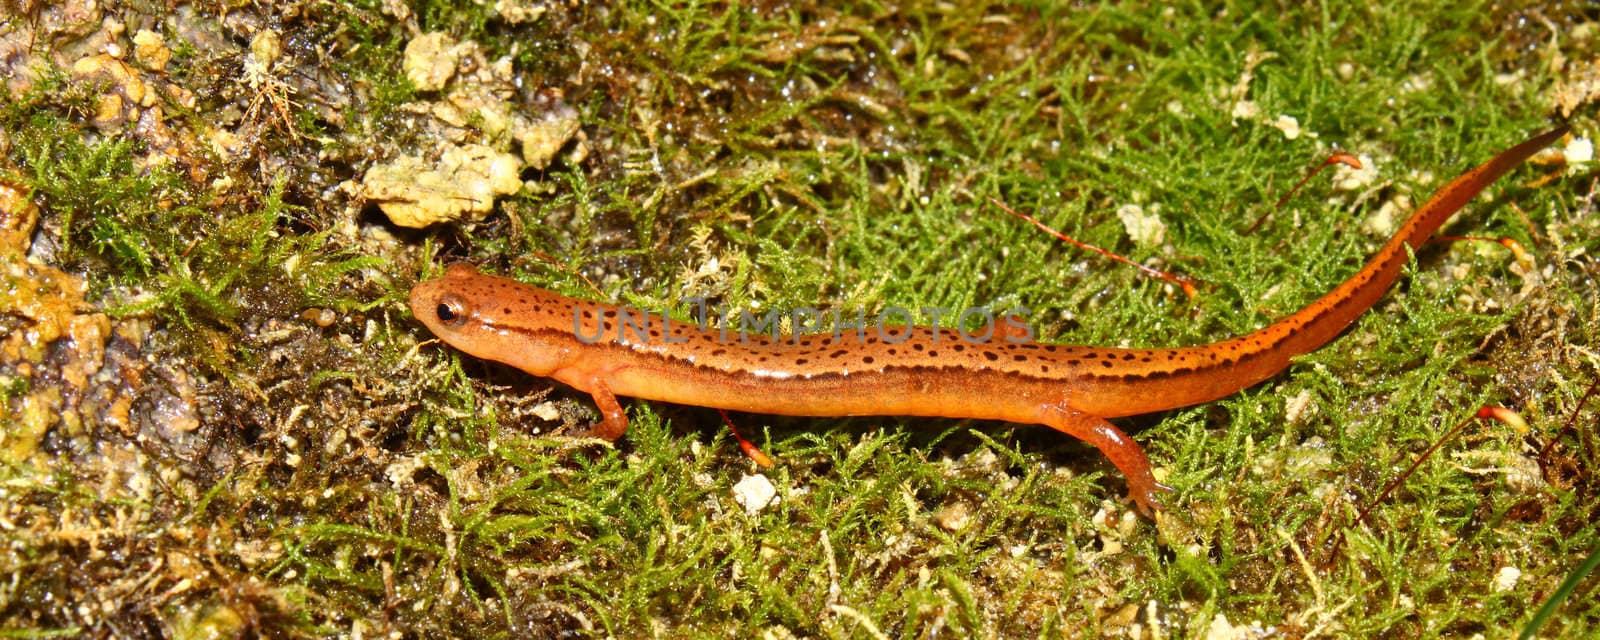 A Southern Two-lined Salamander (Eurycea cirrigera) in the southern USA.